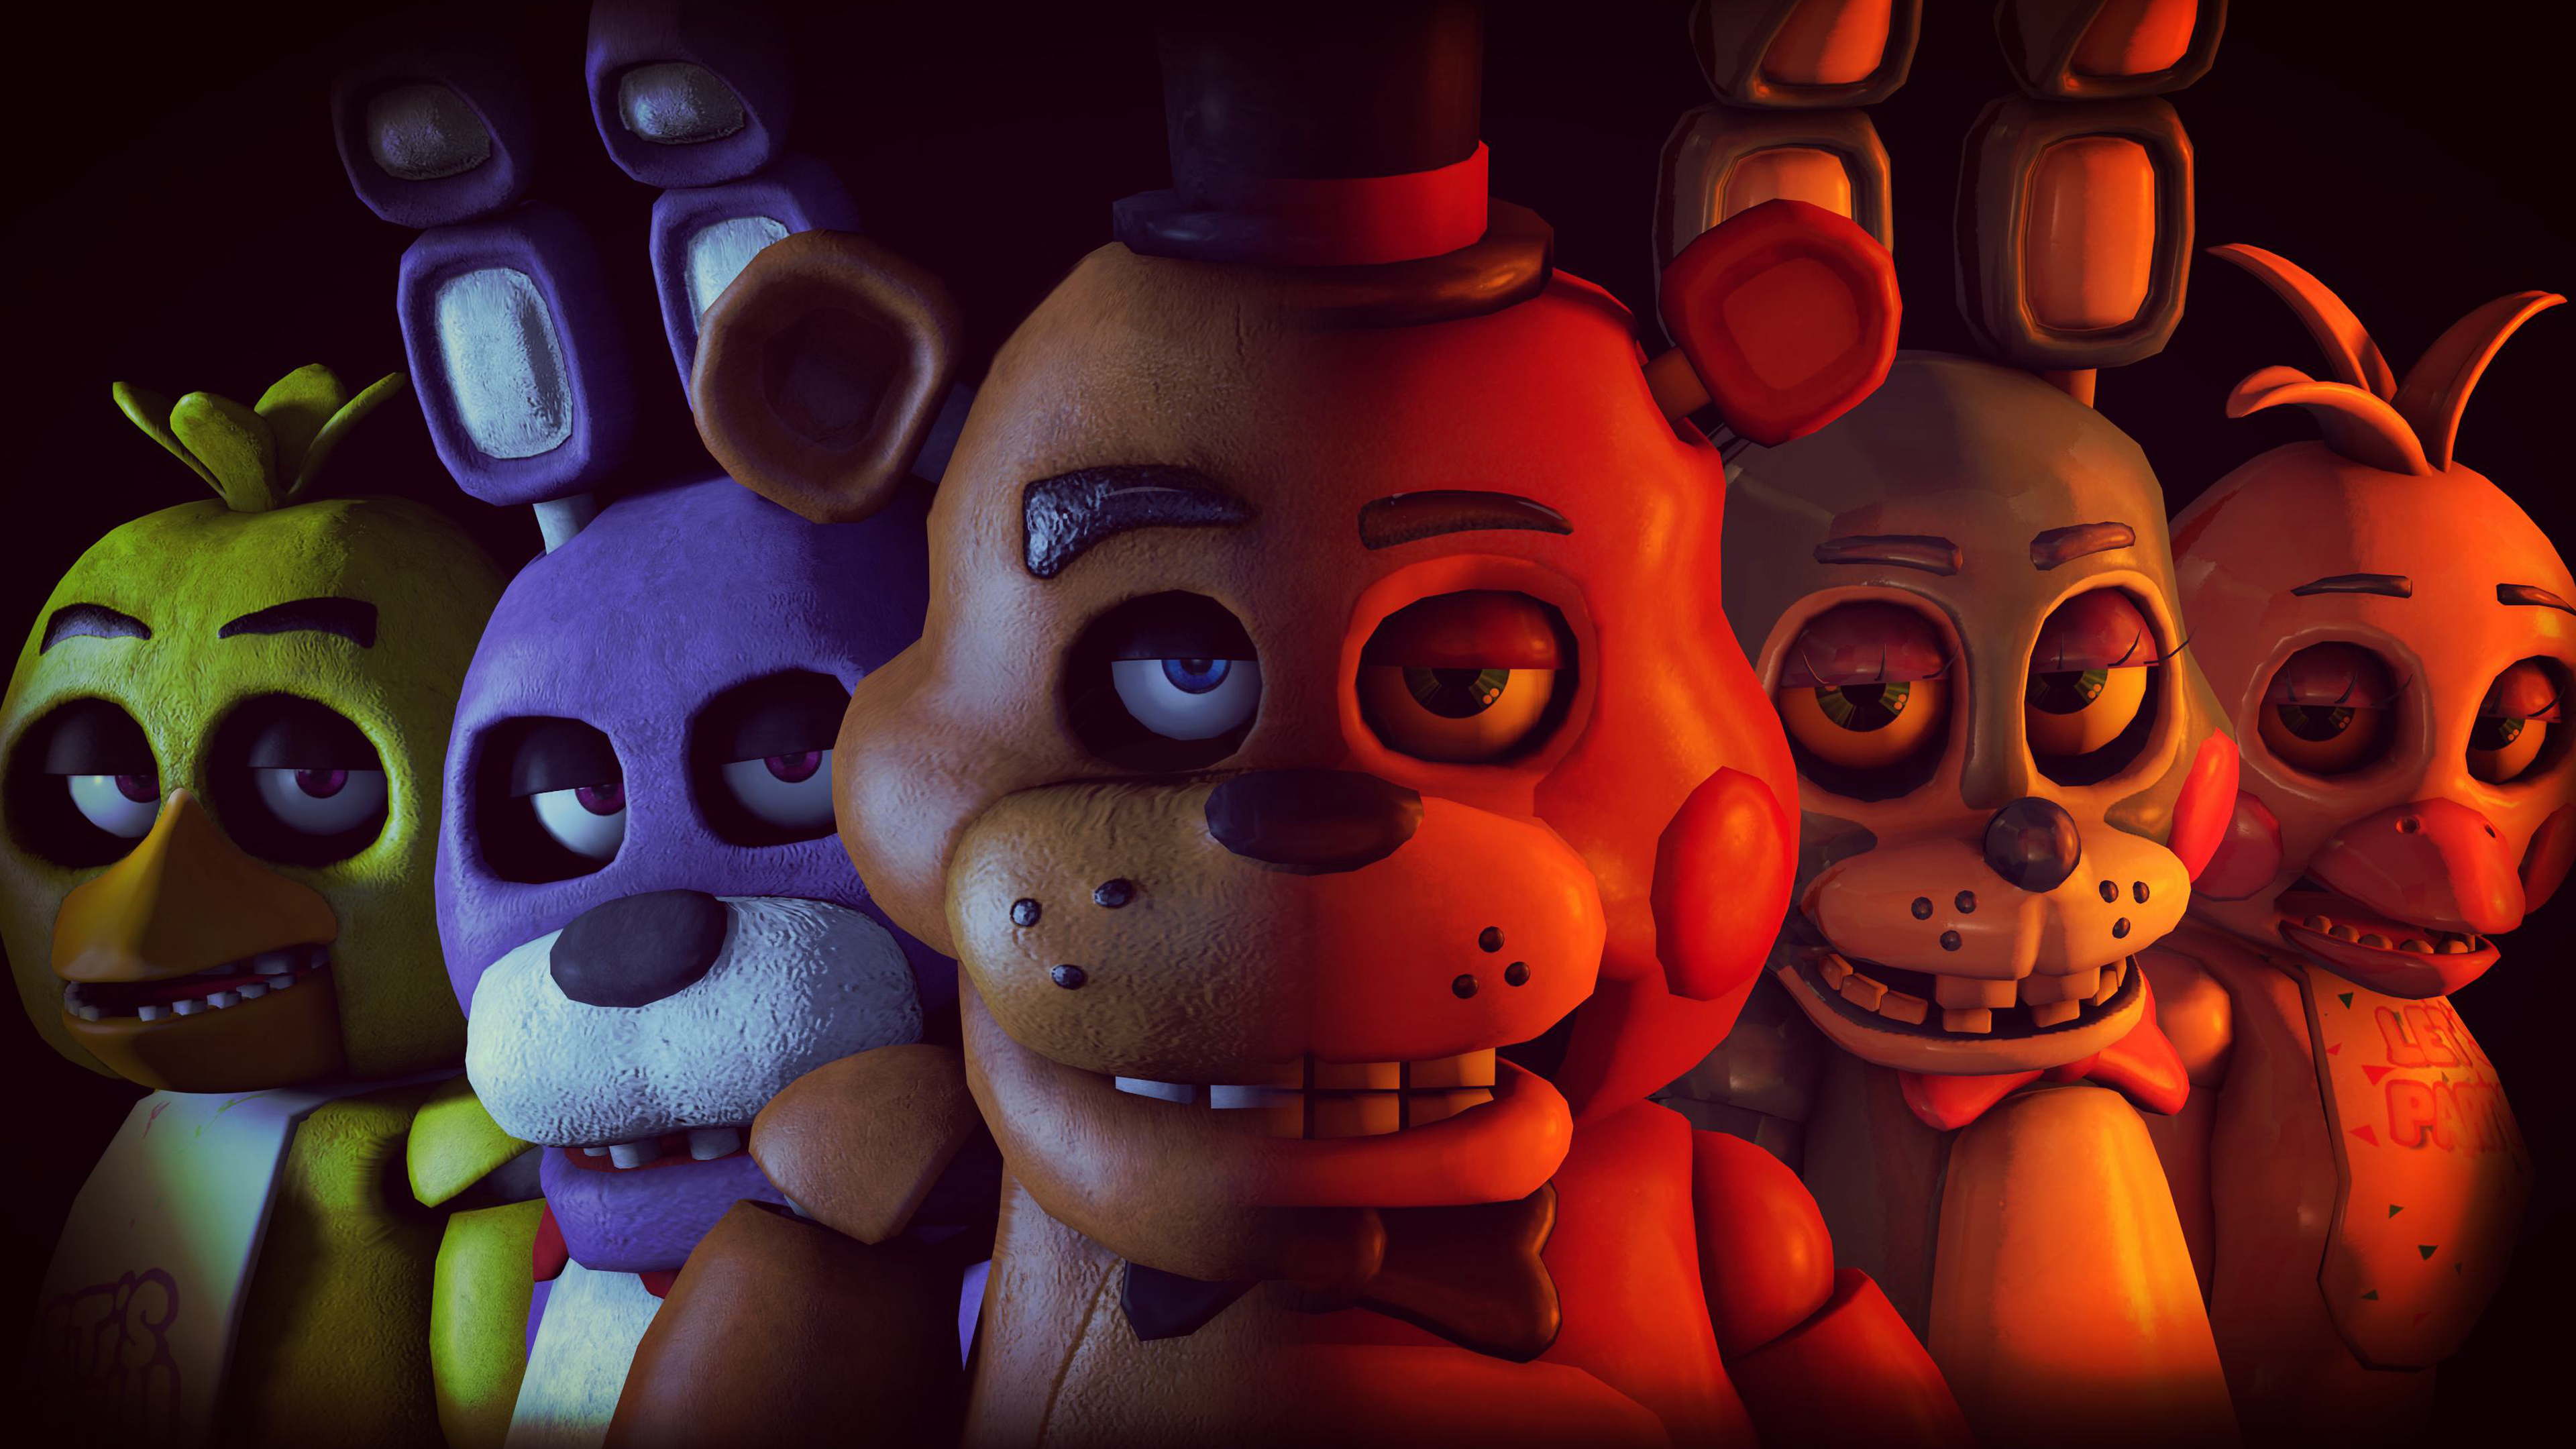 Best Mobile Five Nights At Freddy's Backgrounds